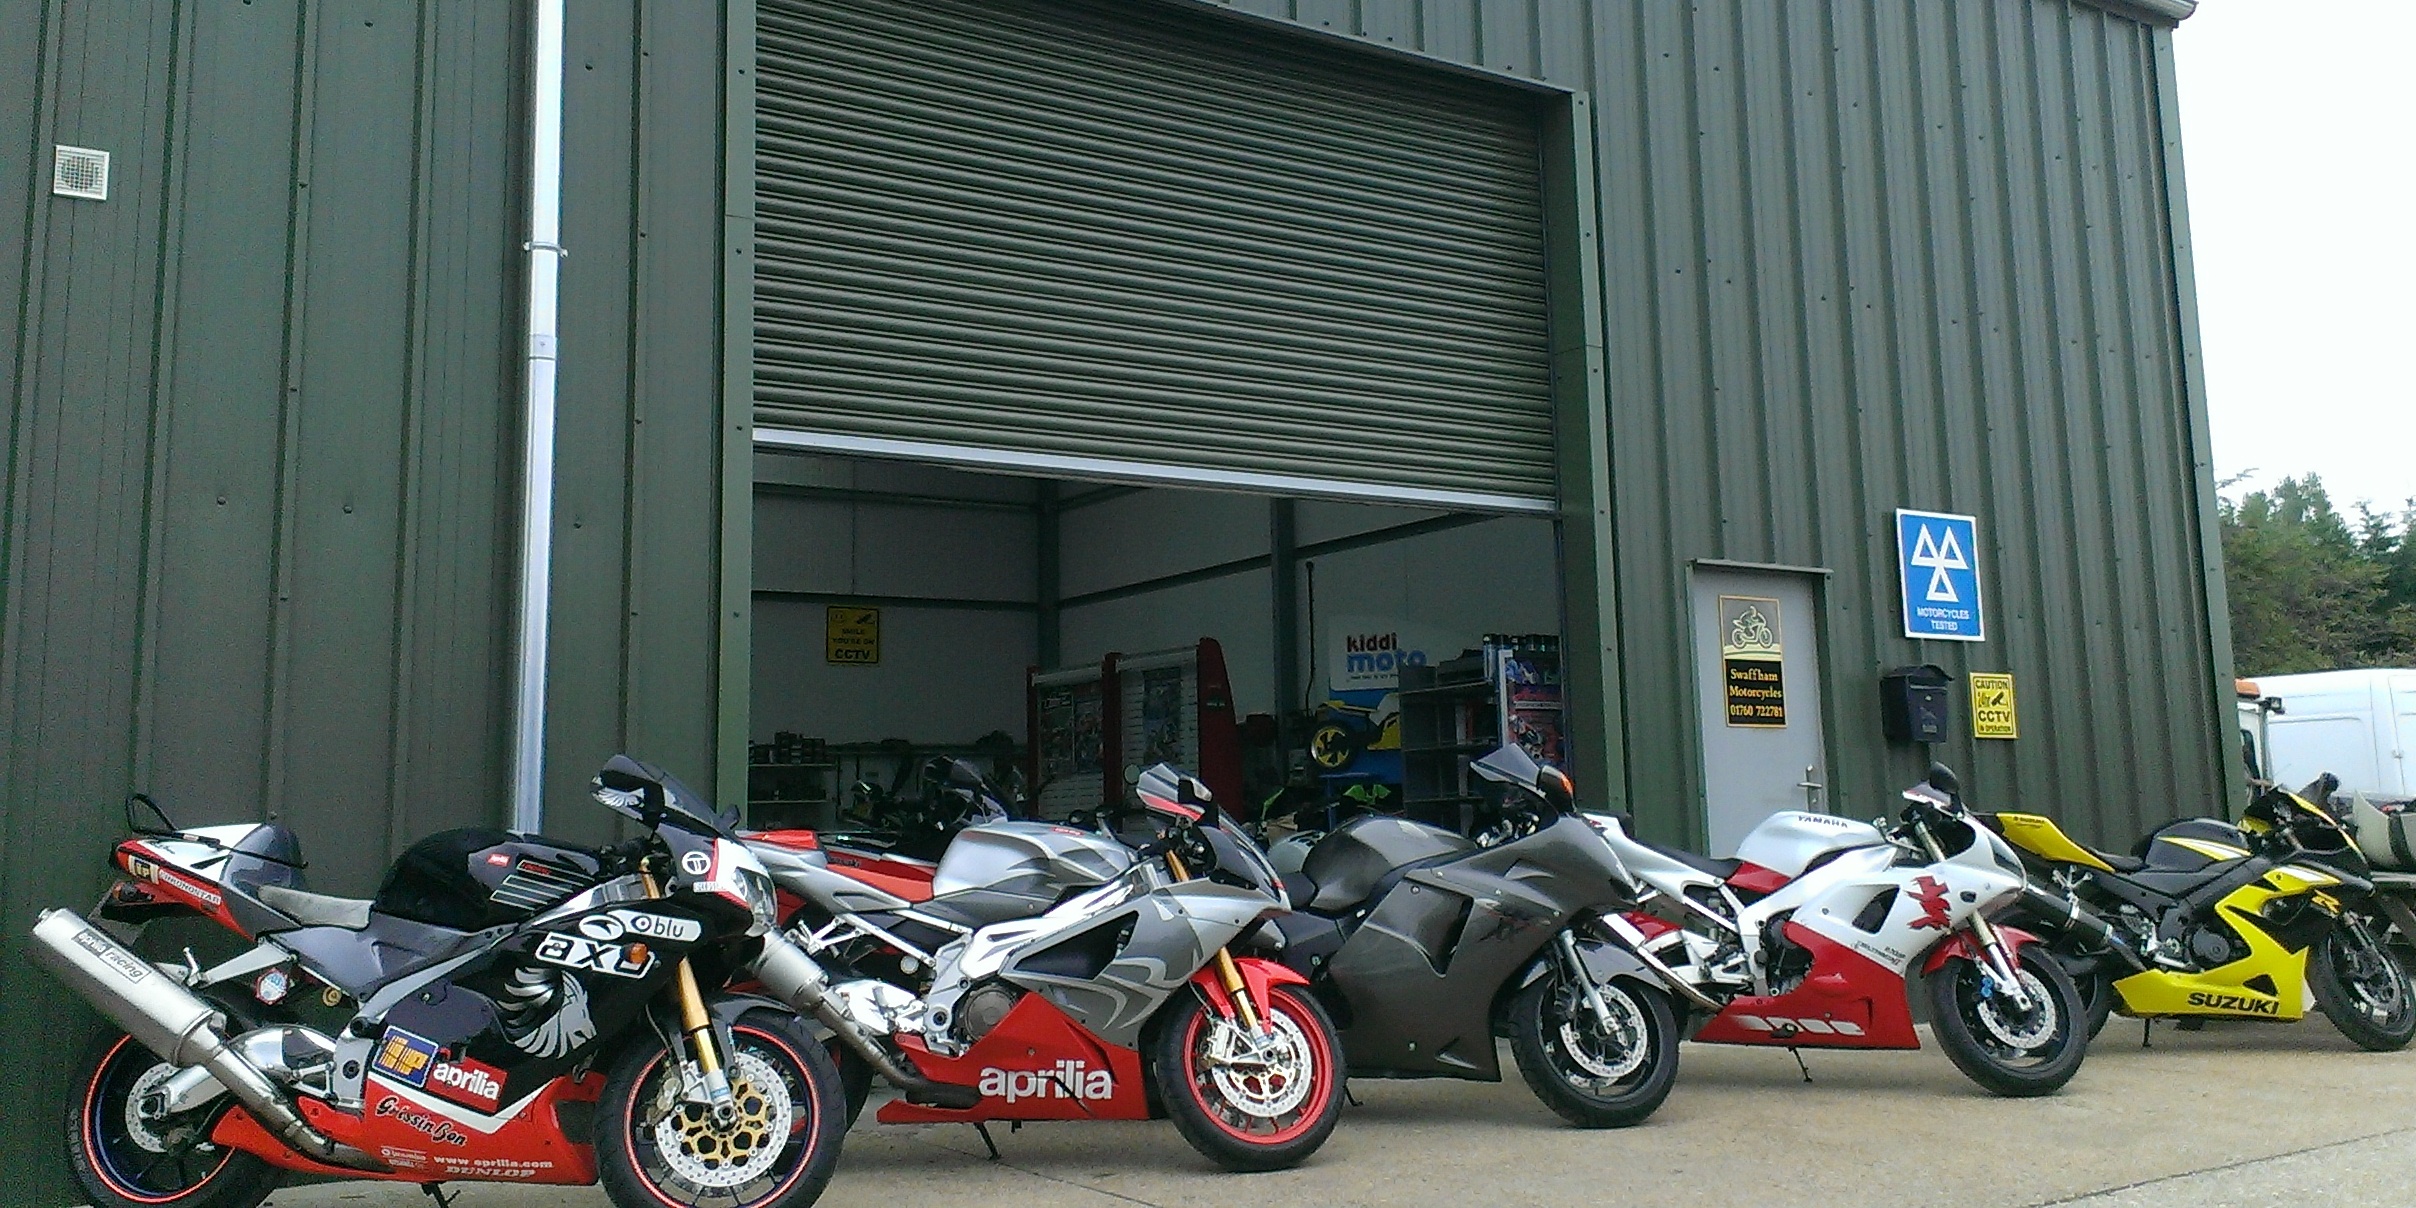 Welcome to Swaffham Motorcycles